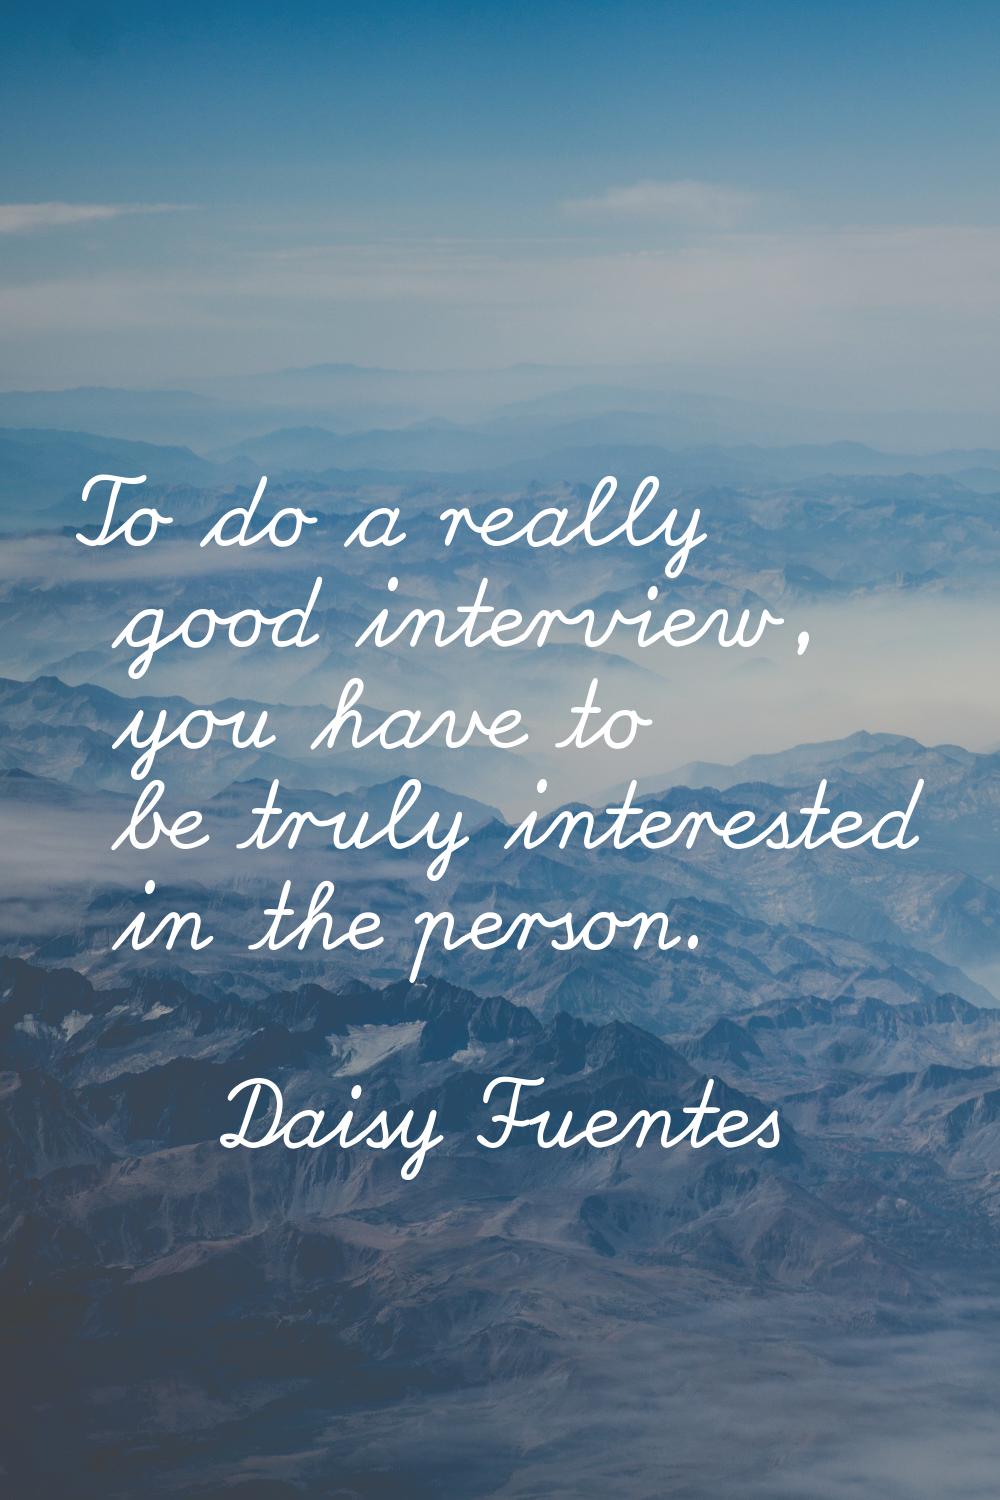 To do a really good interview, you have to be truly interested in the person.